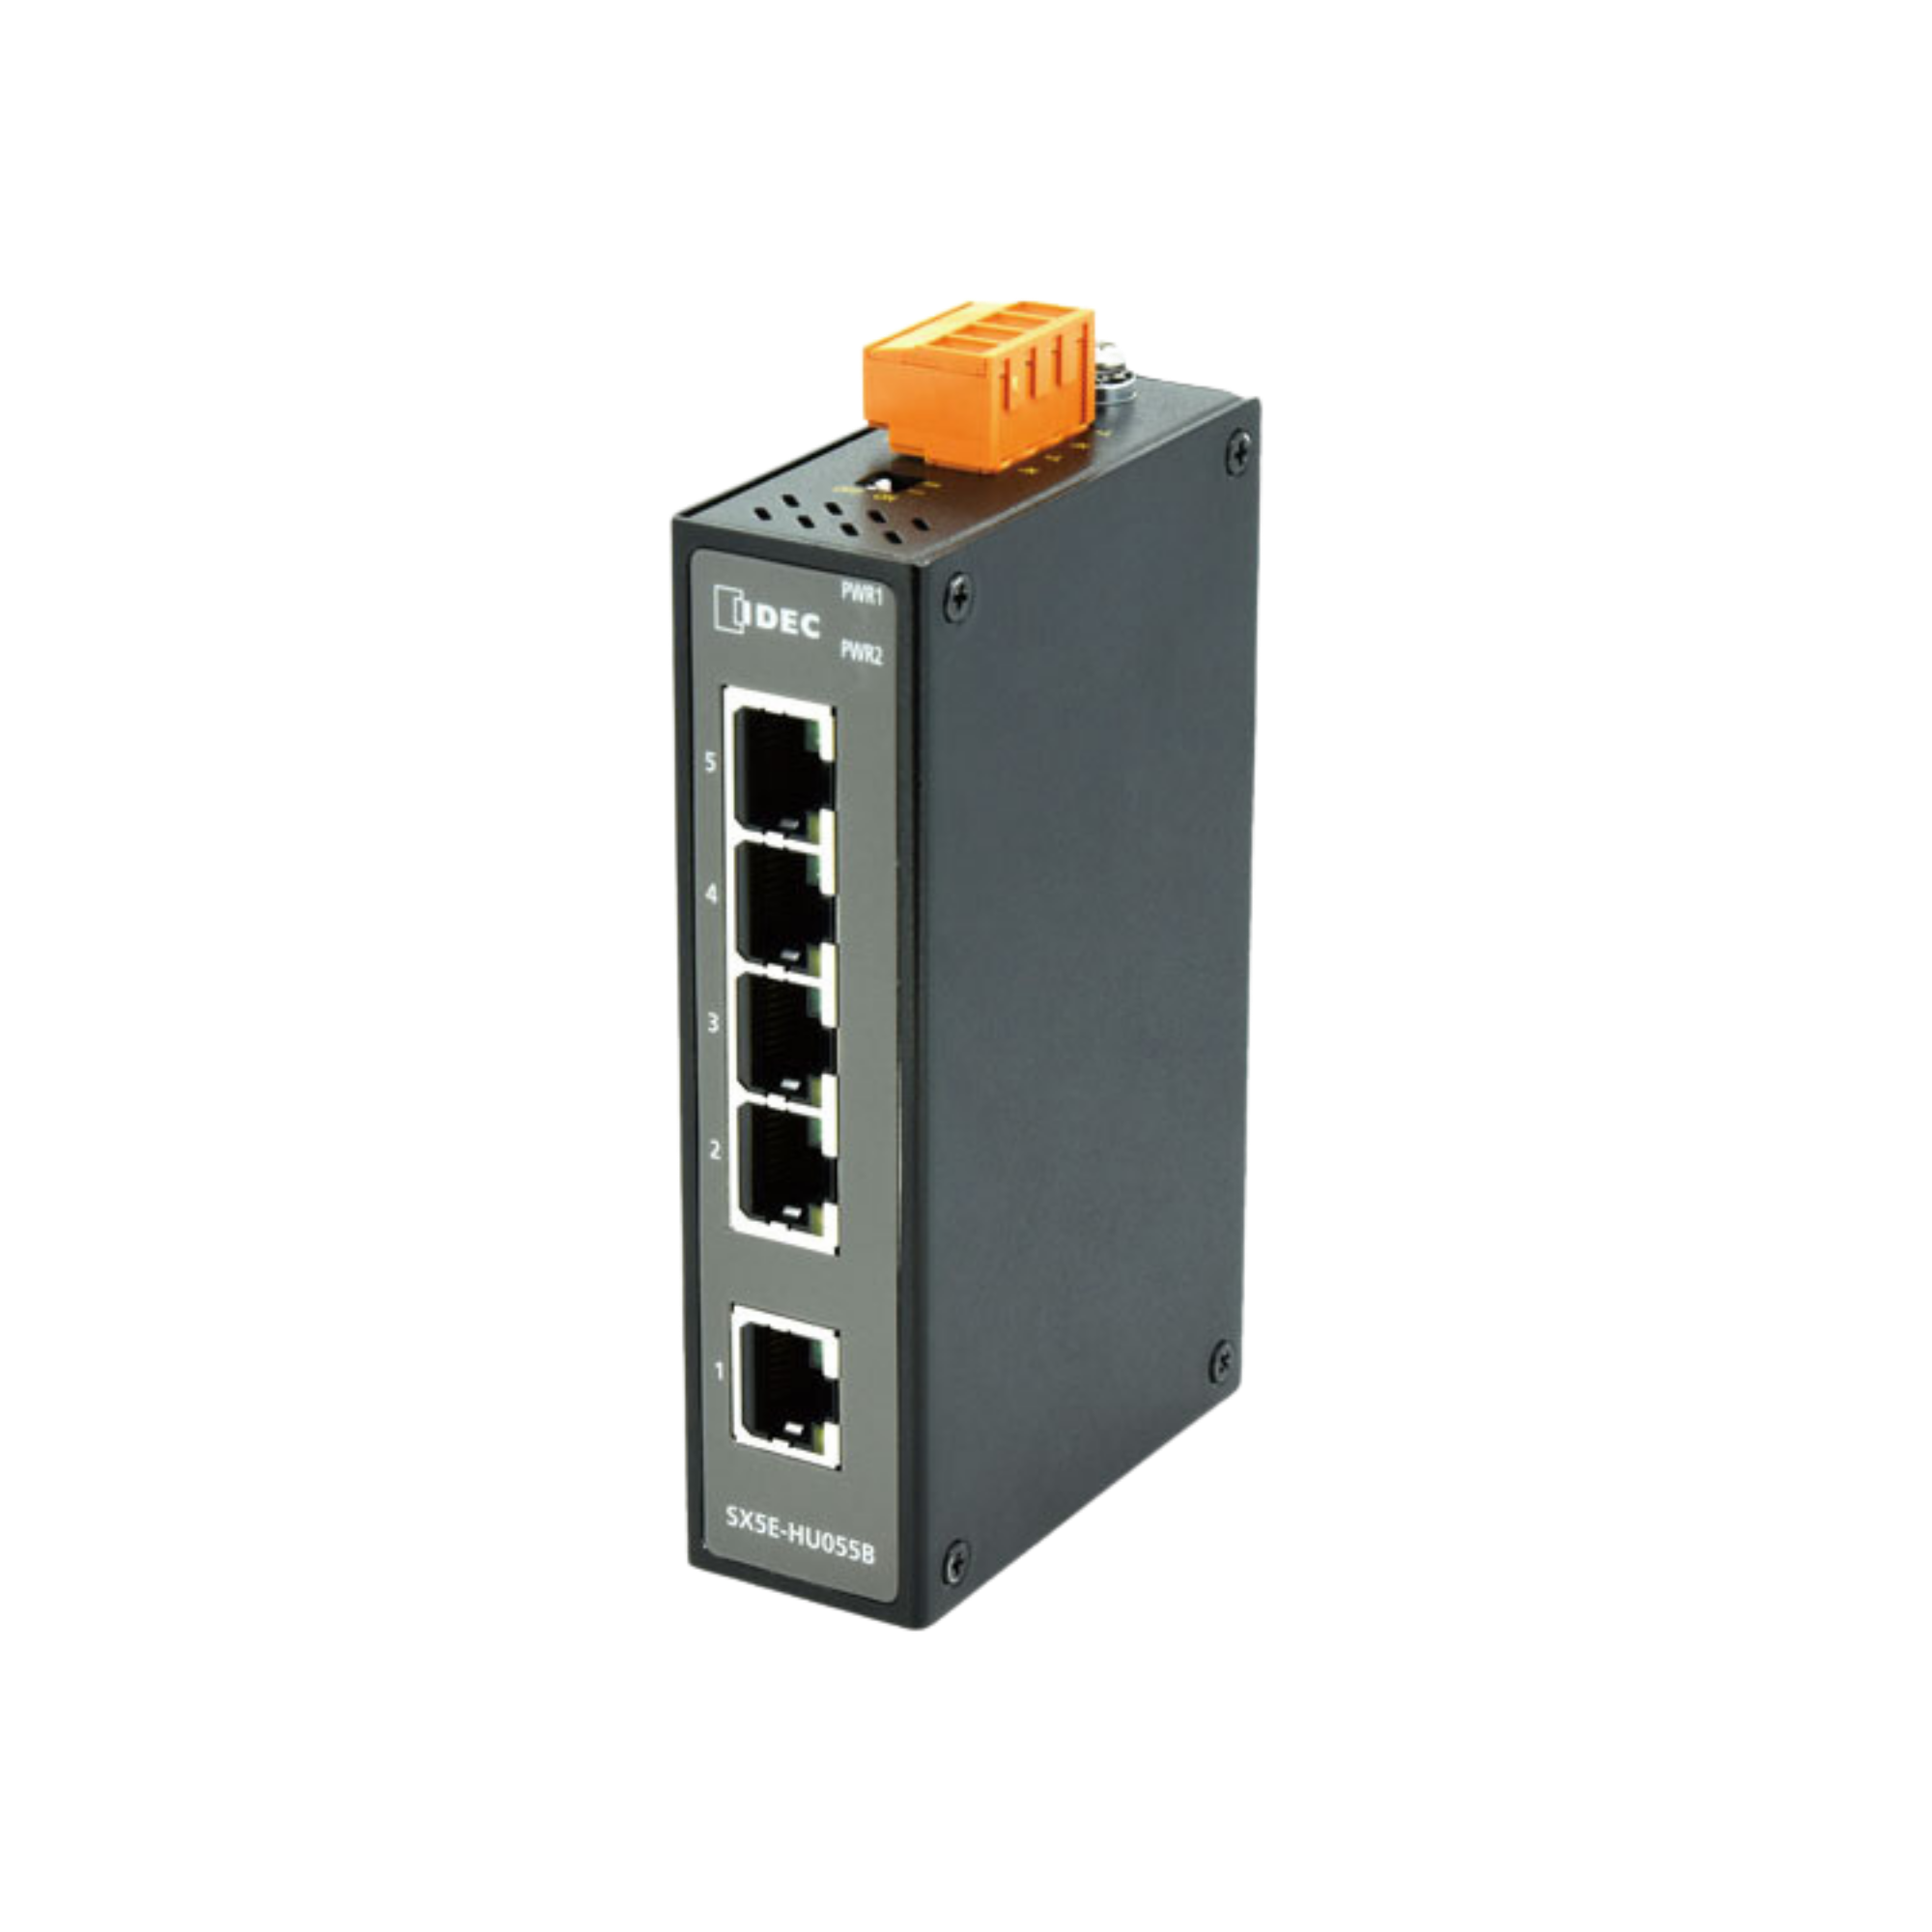 Rectangular housing with ethernet ports on front face